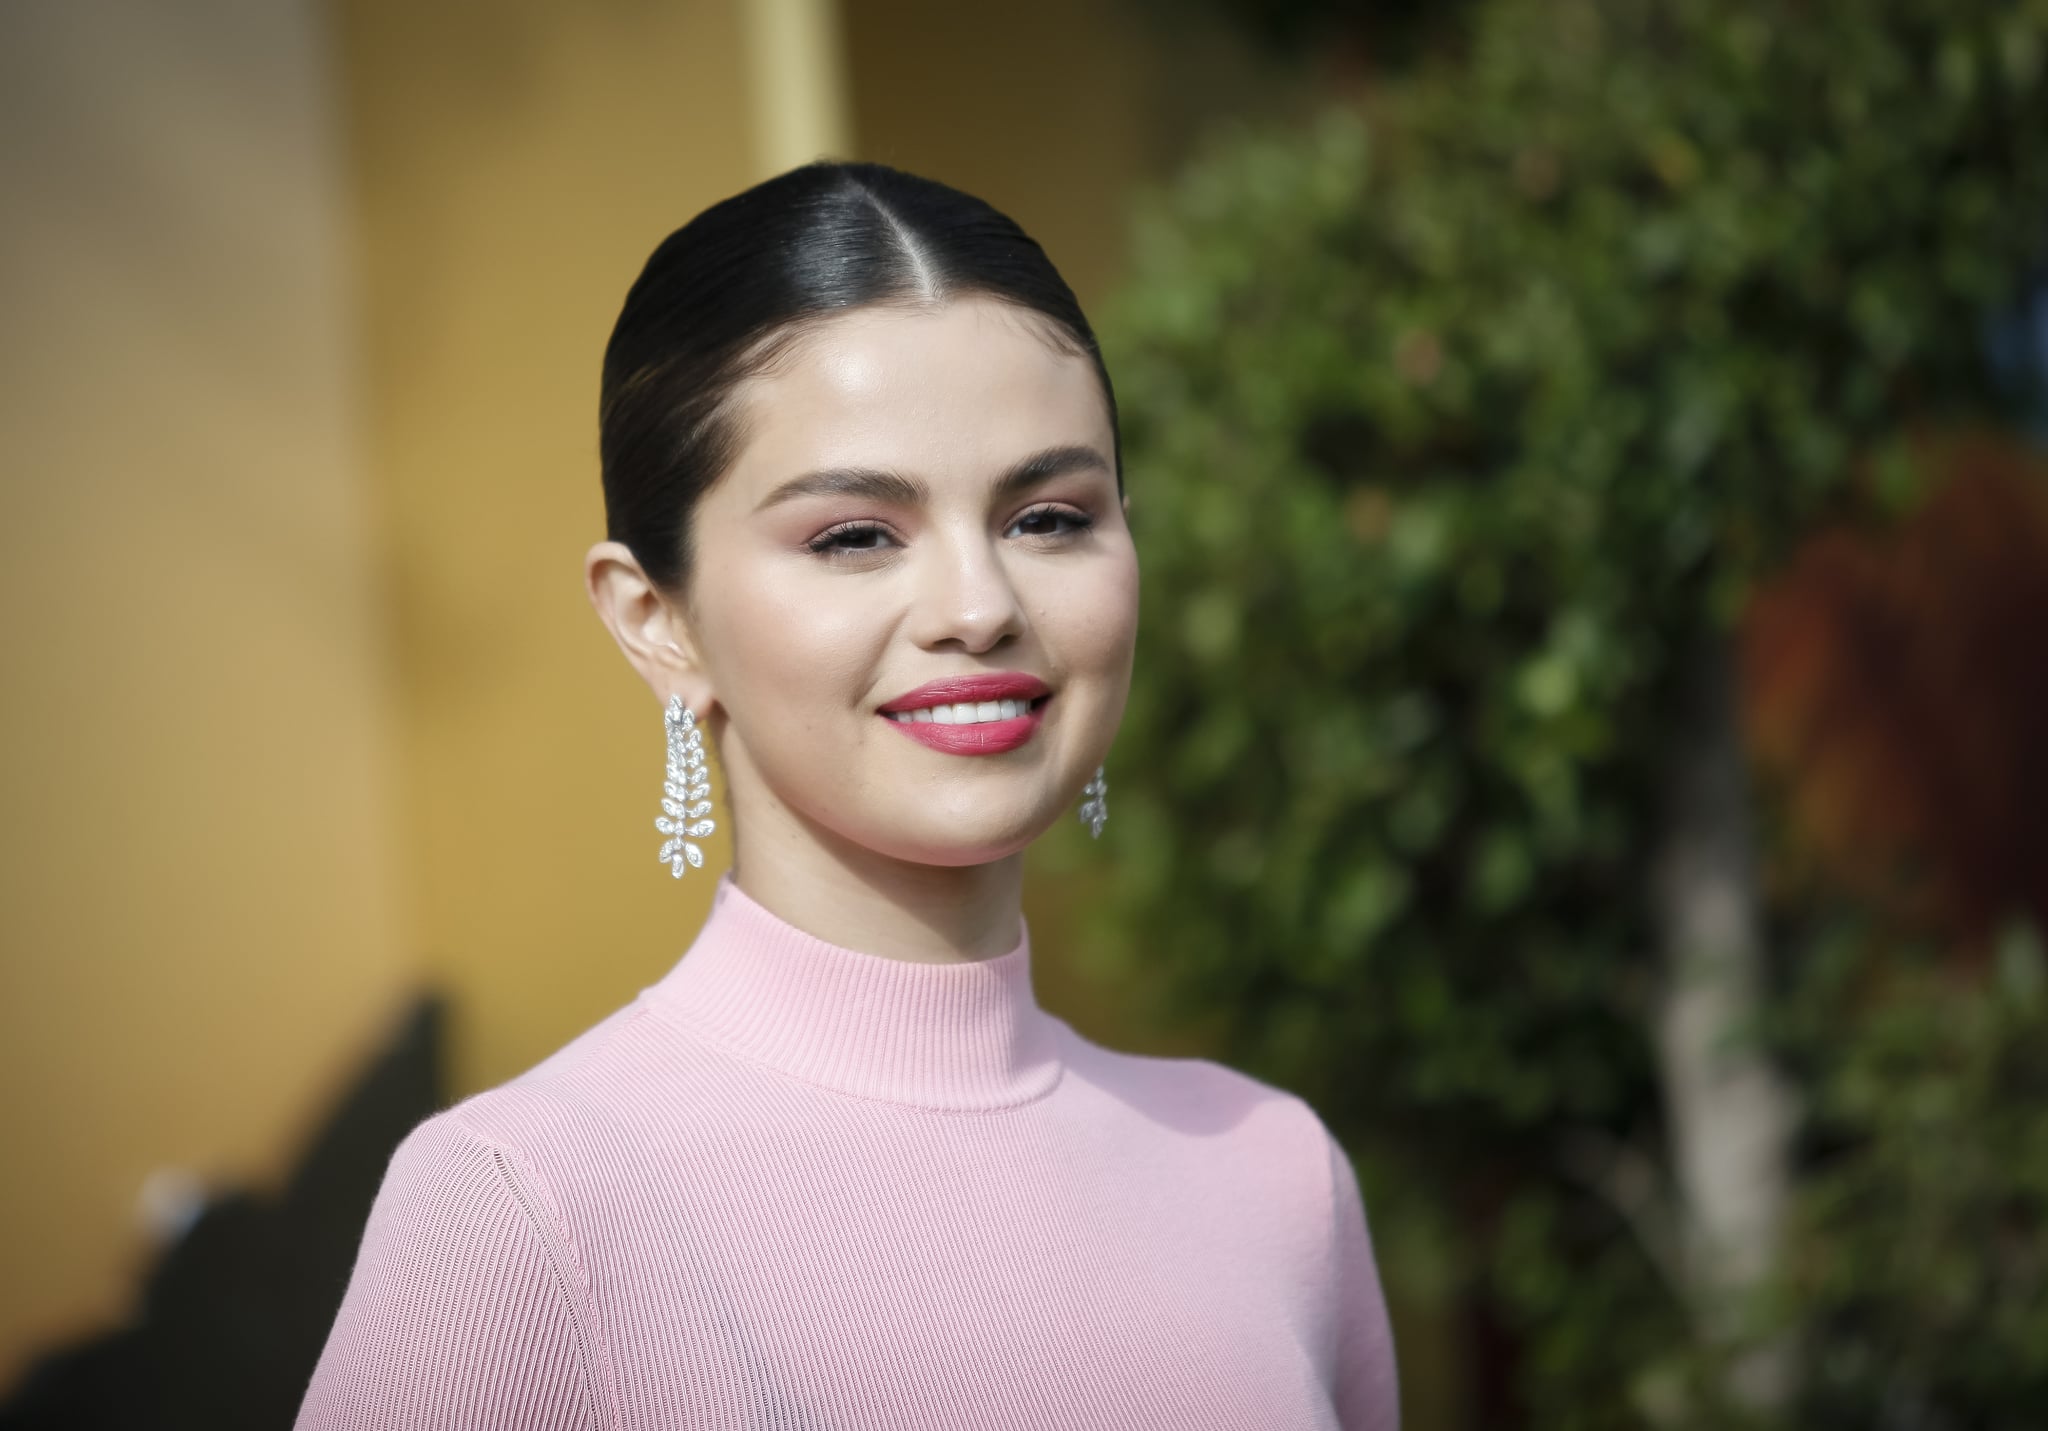 WESTWOOD, CALIFORNIA - JANUARY 11: Selena Gomez attends the Premiere of Universal Pictures' 